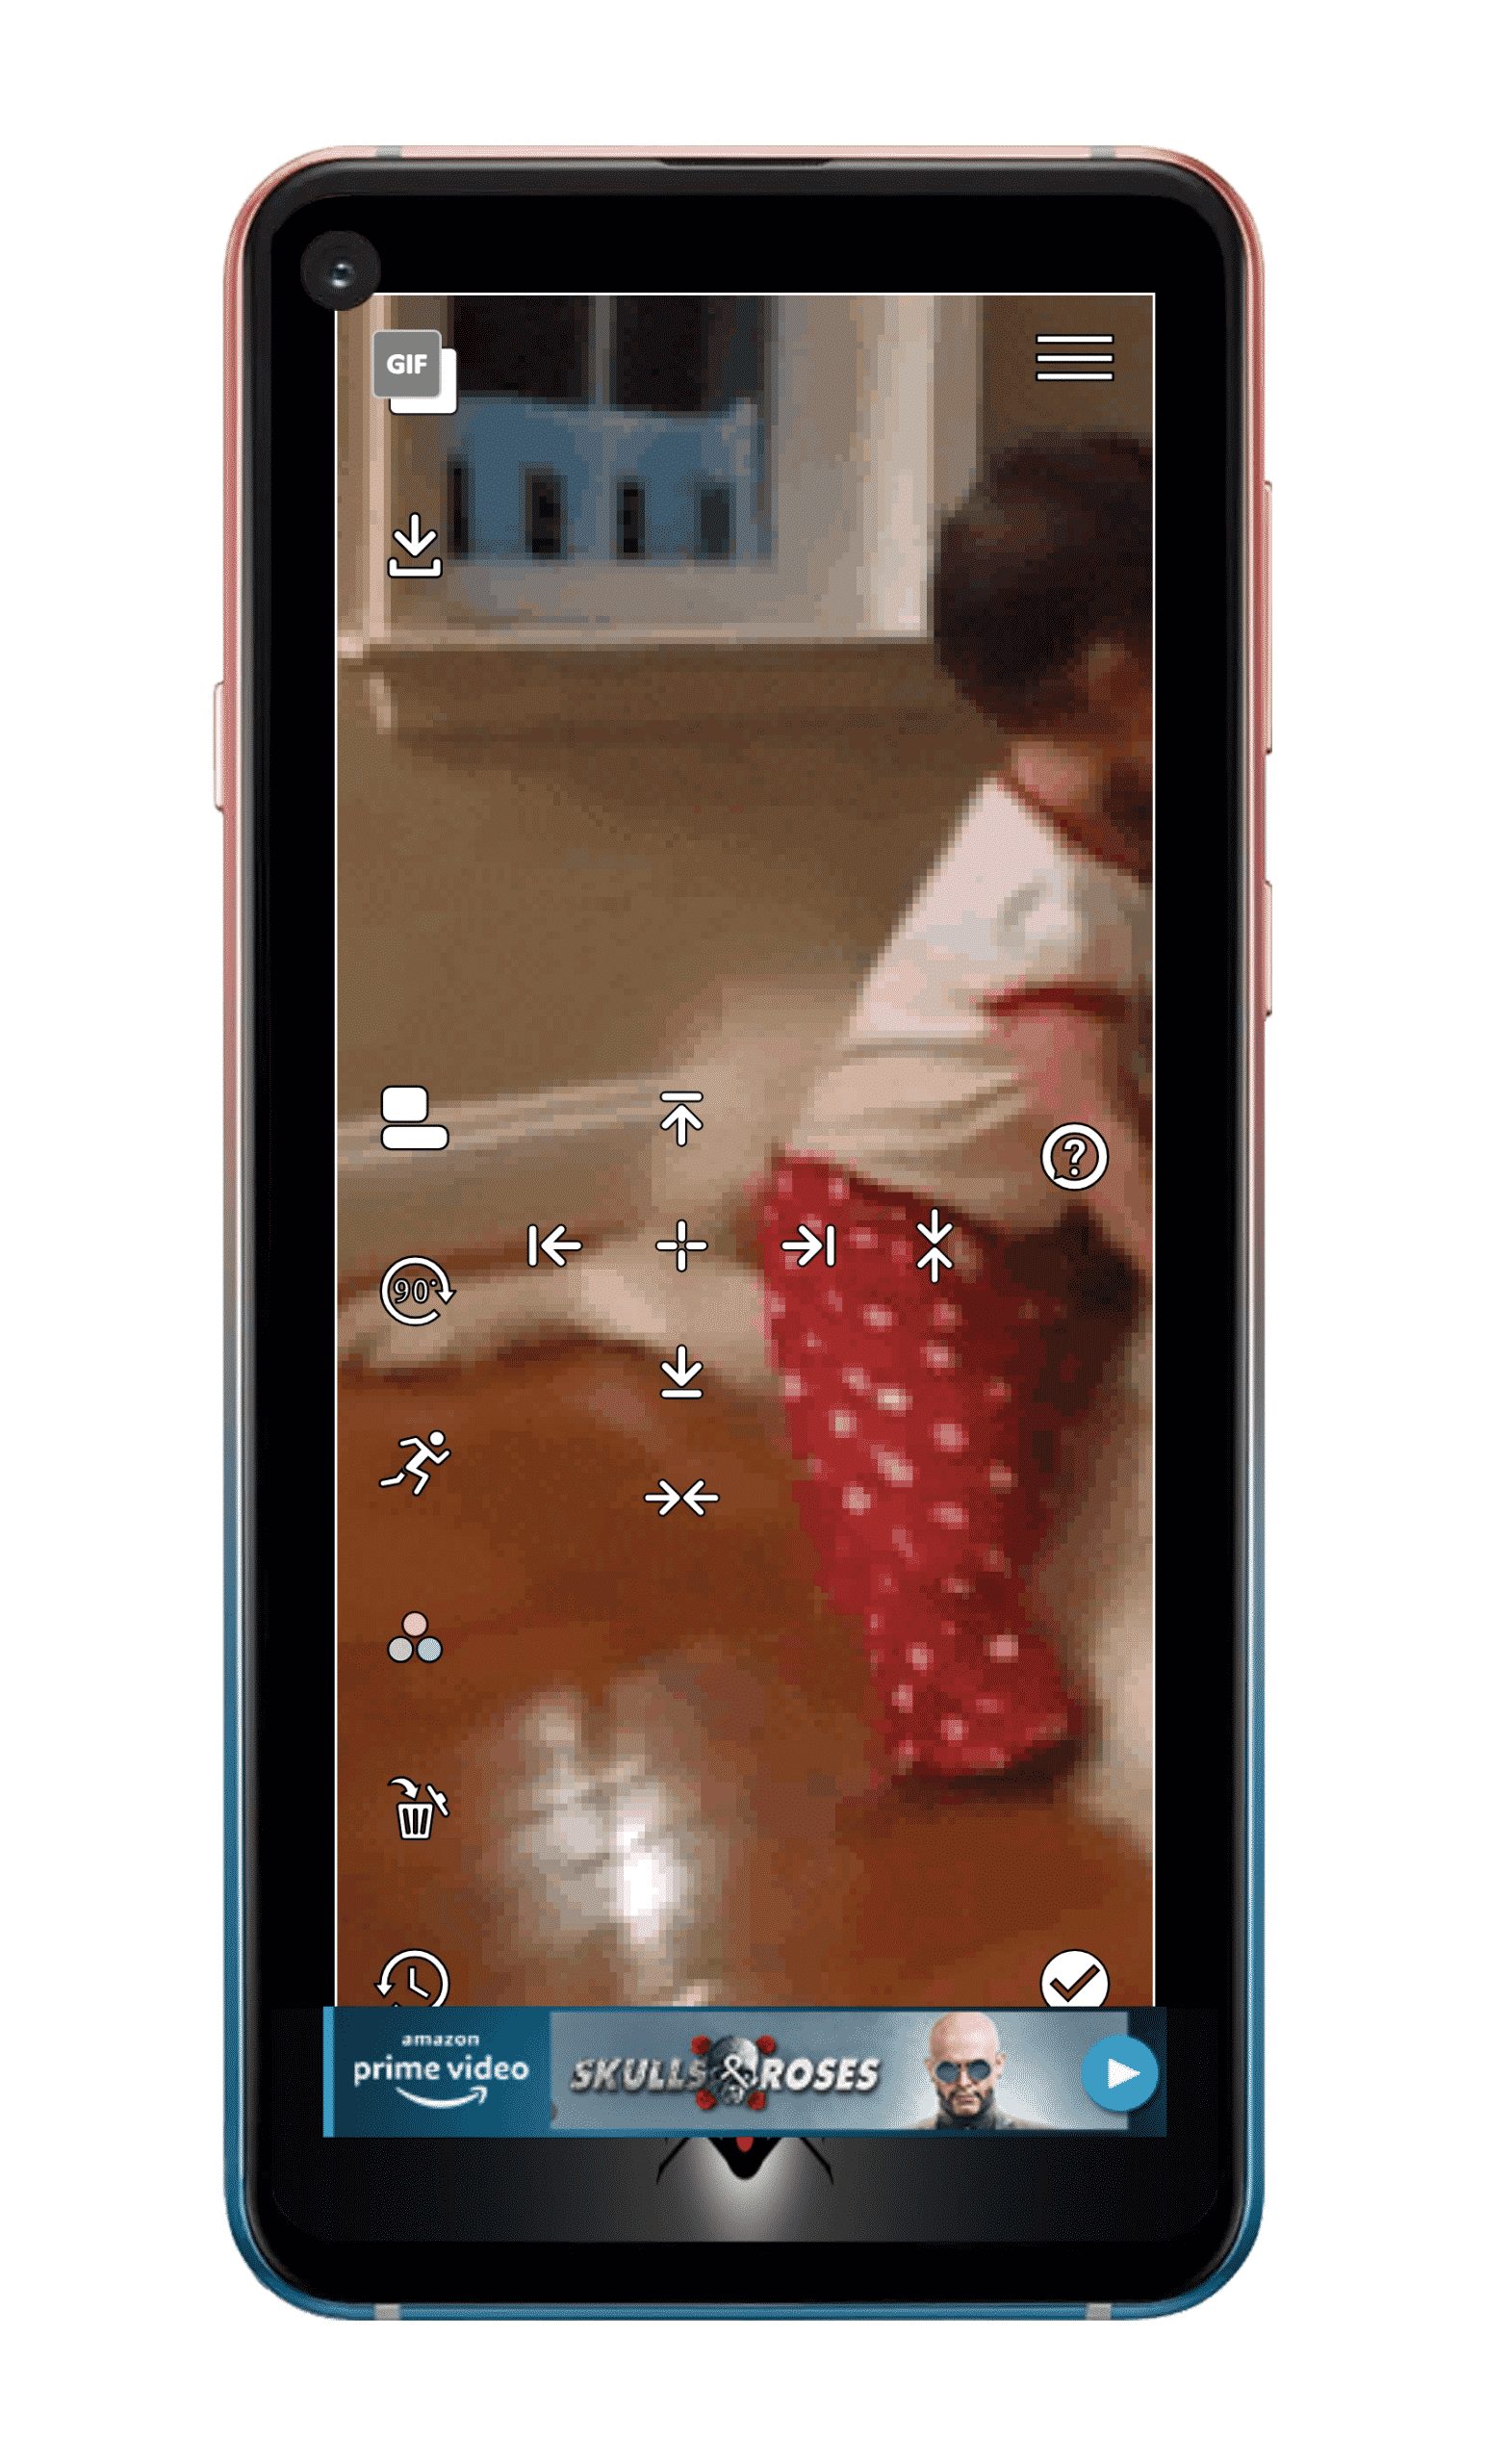 Use a GIF as Live Wallpaper On Android